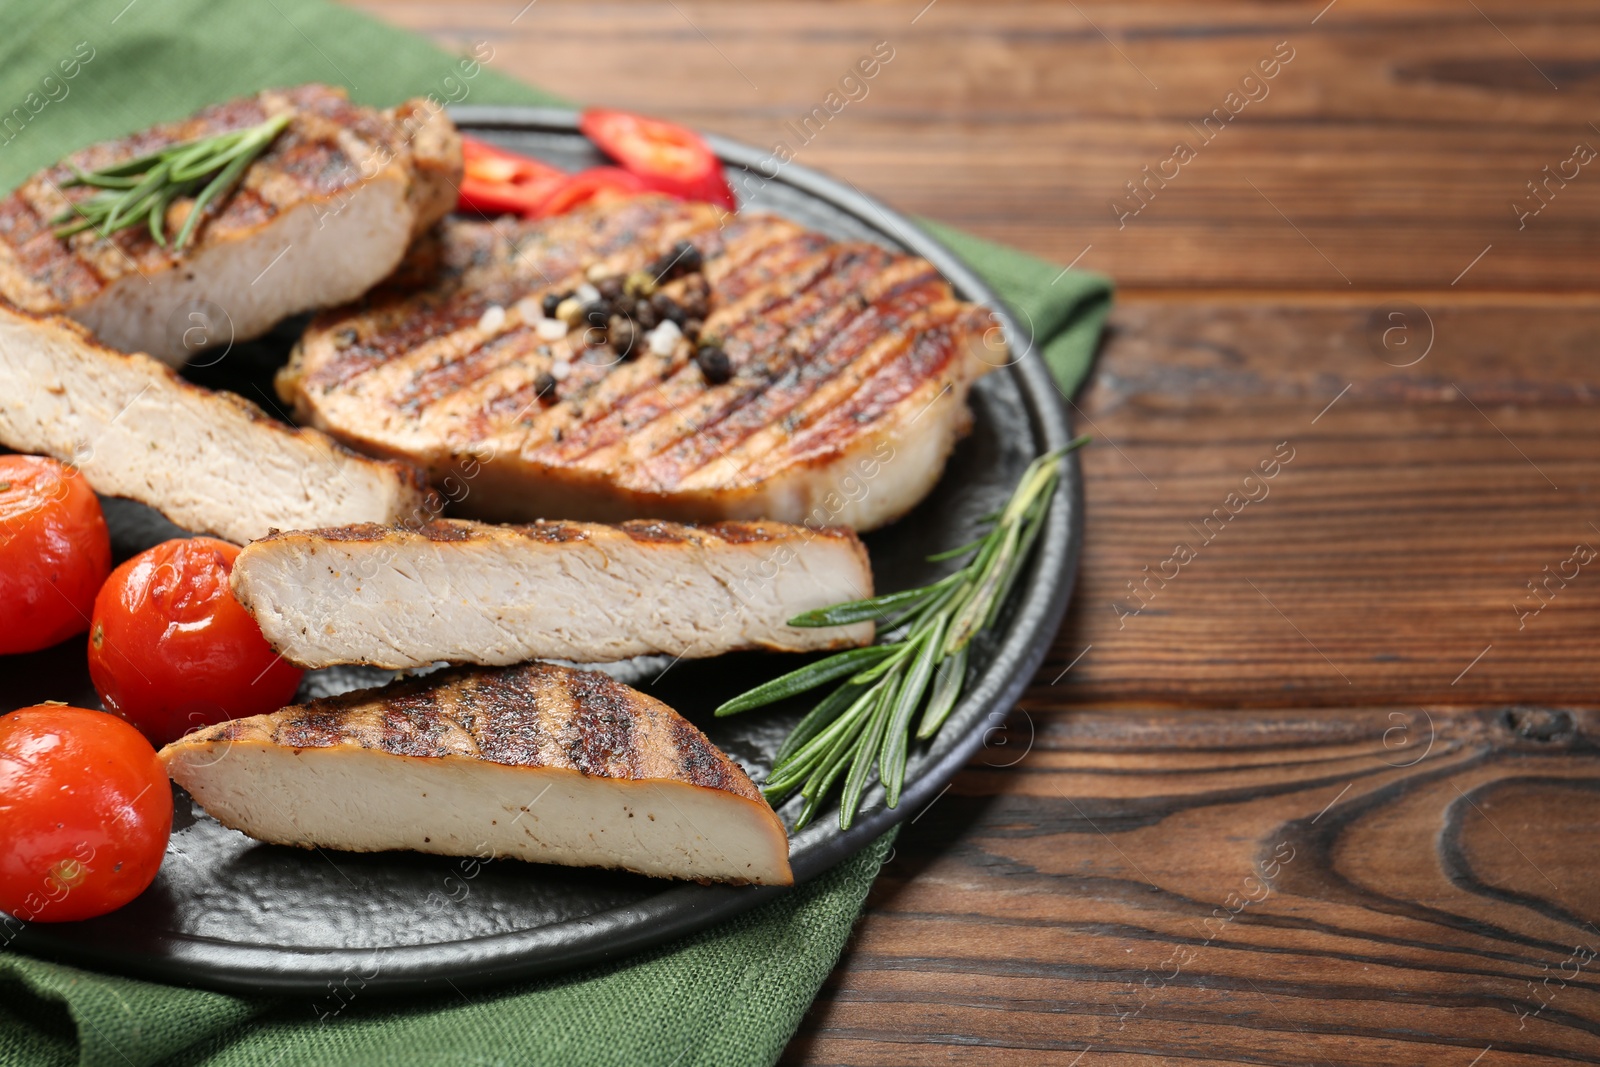 Photo of Grilled pork steaks with rosemary, spices and tomatoes on wooden table. Space for text